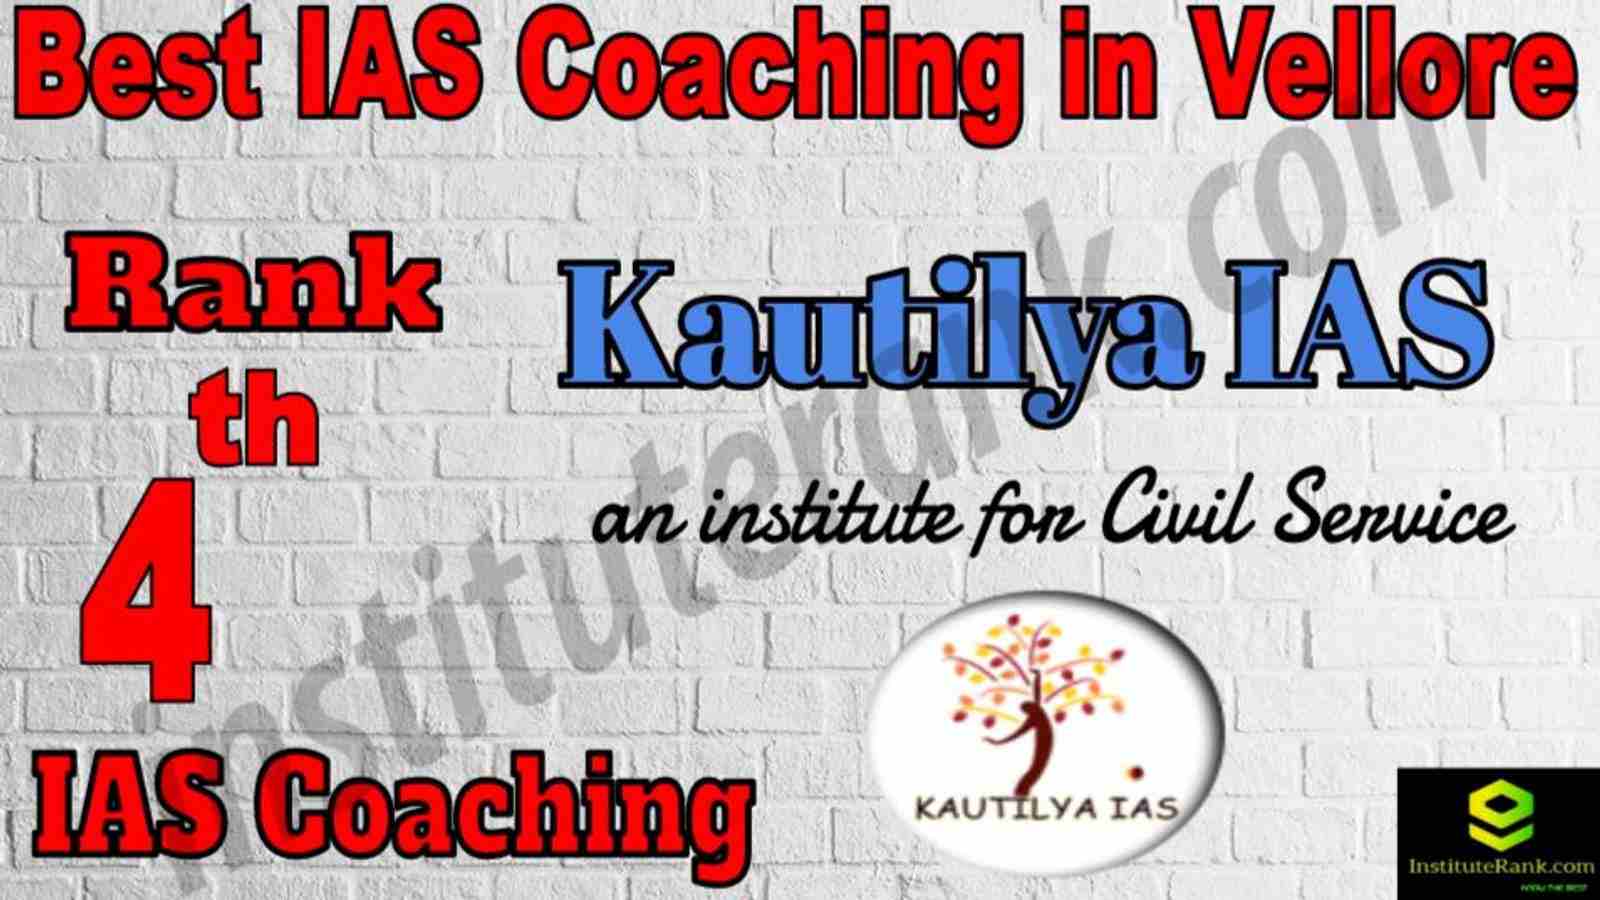 4th Best IAS Coaching in Vellore